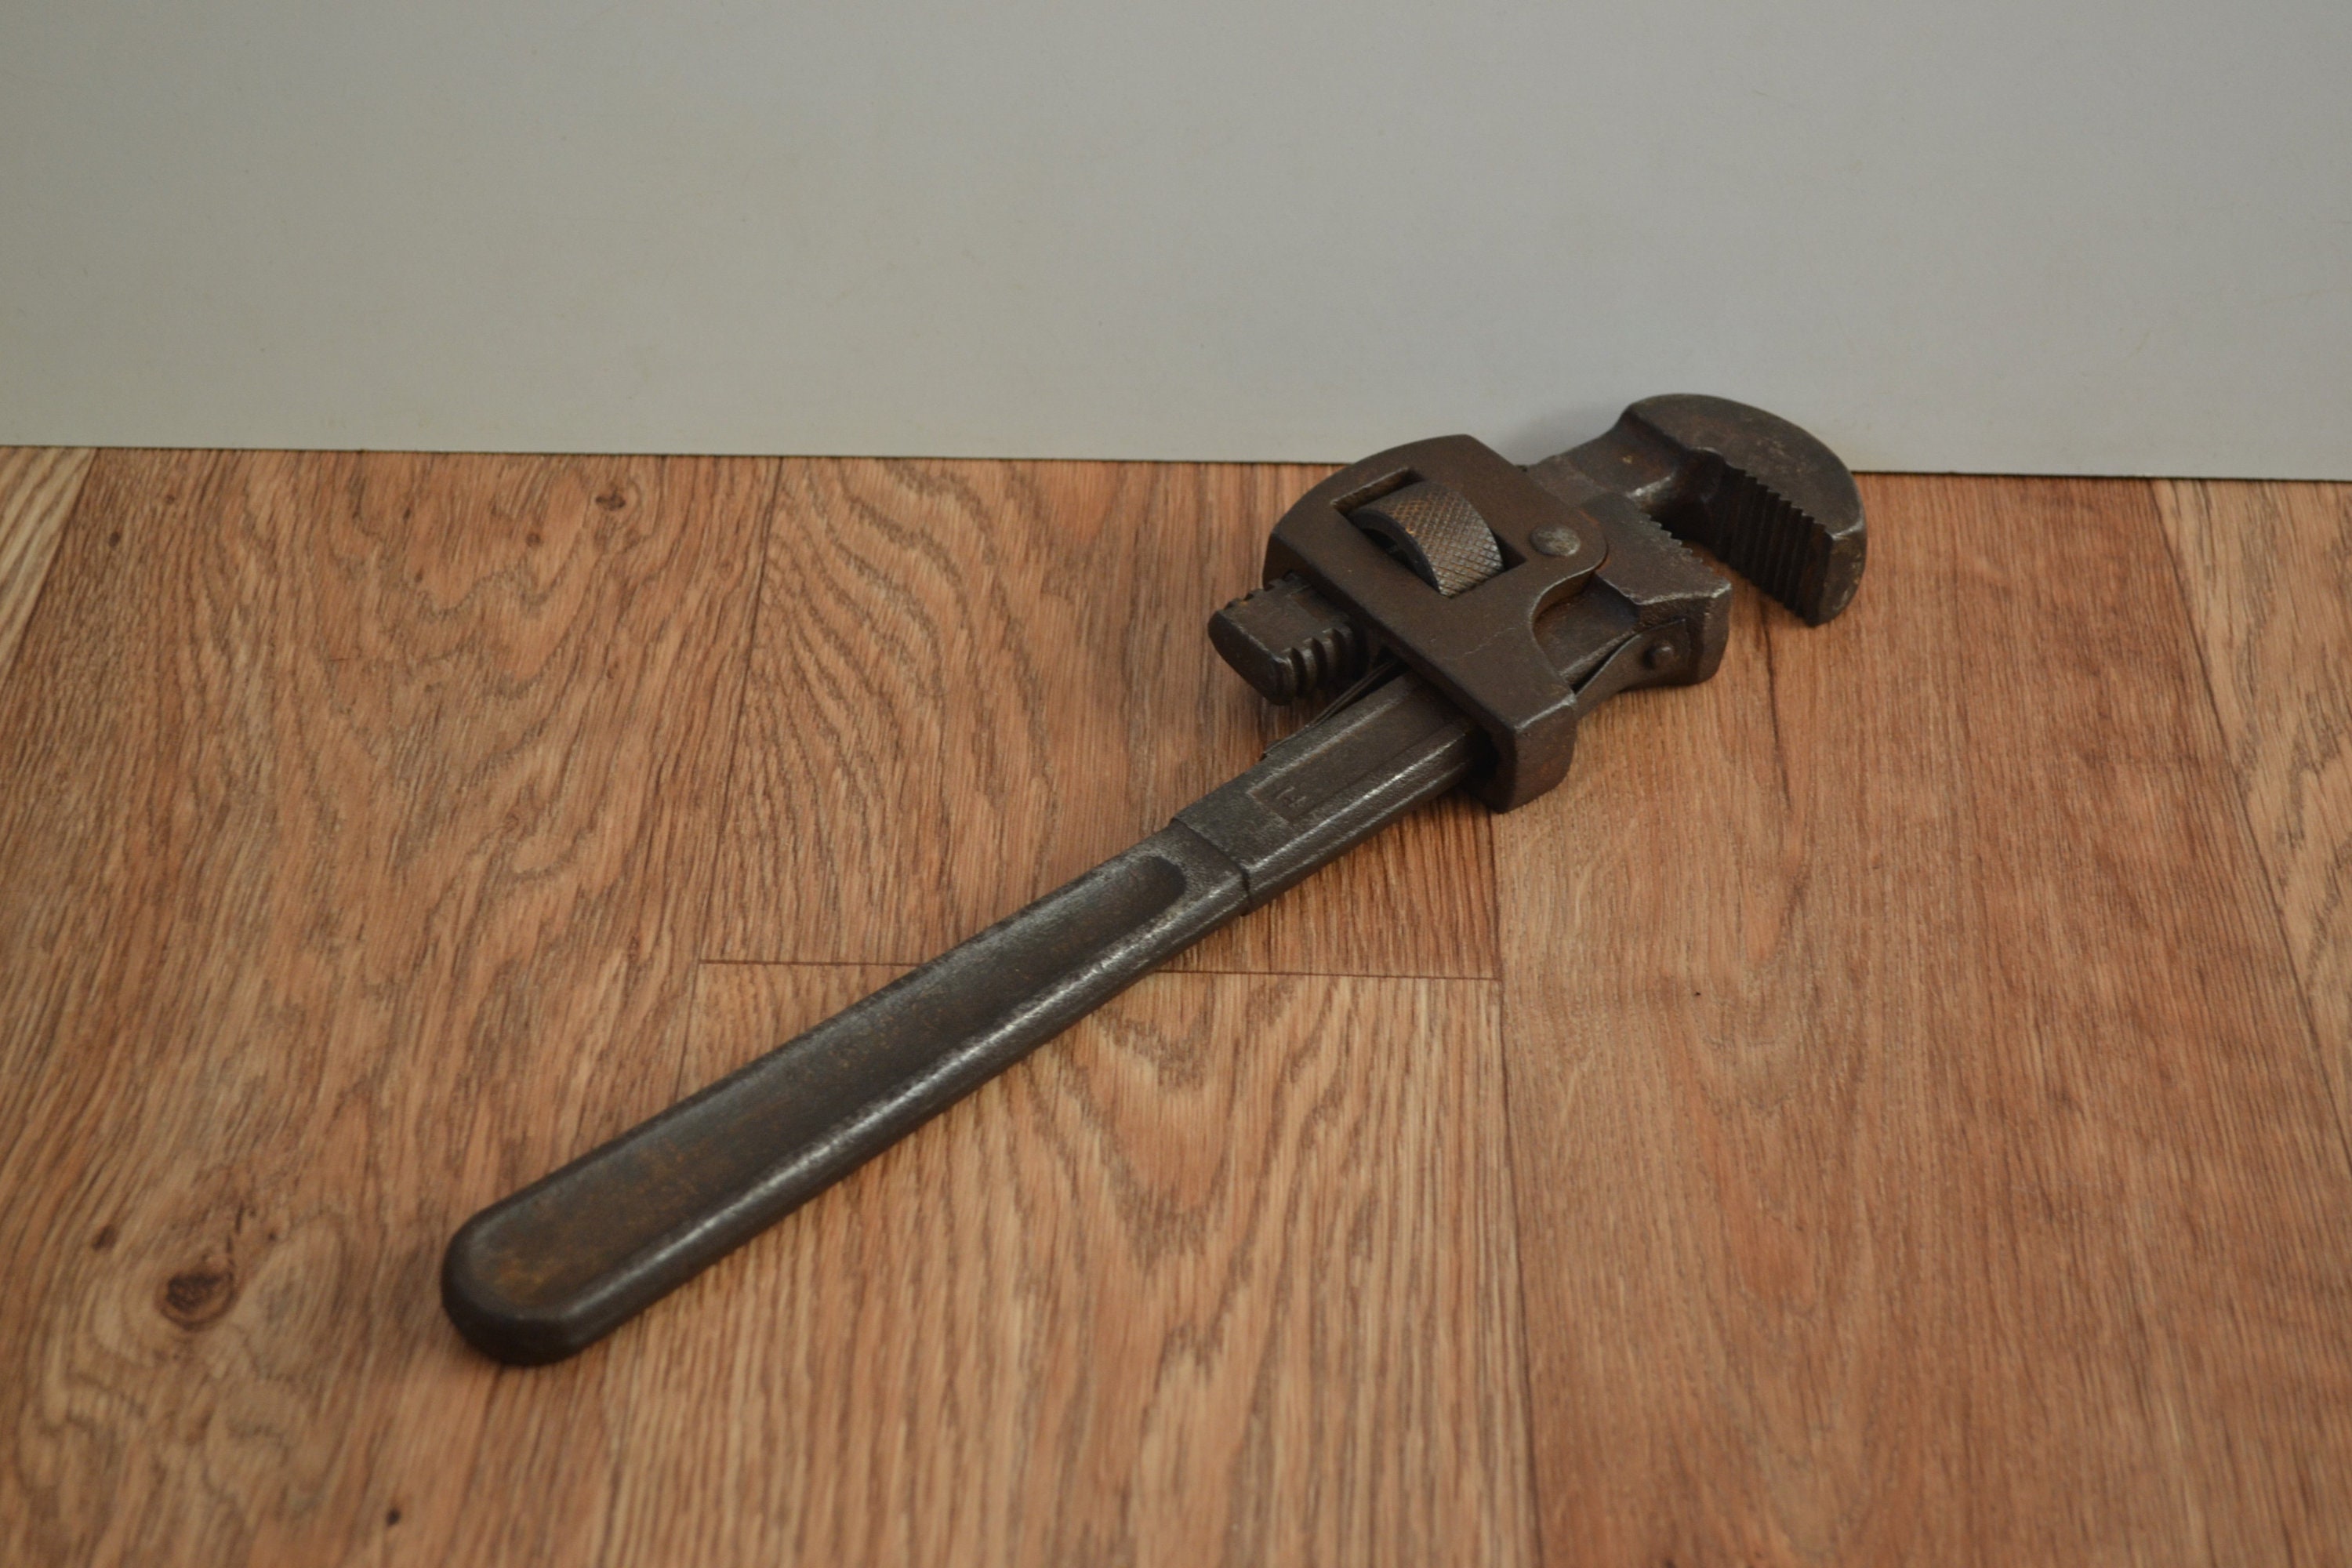 Large Vintage 14” F Monkey Wrench Made in Britain – Good Condition